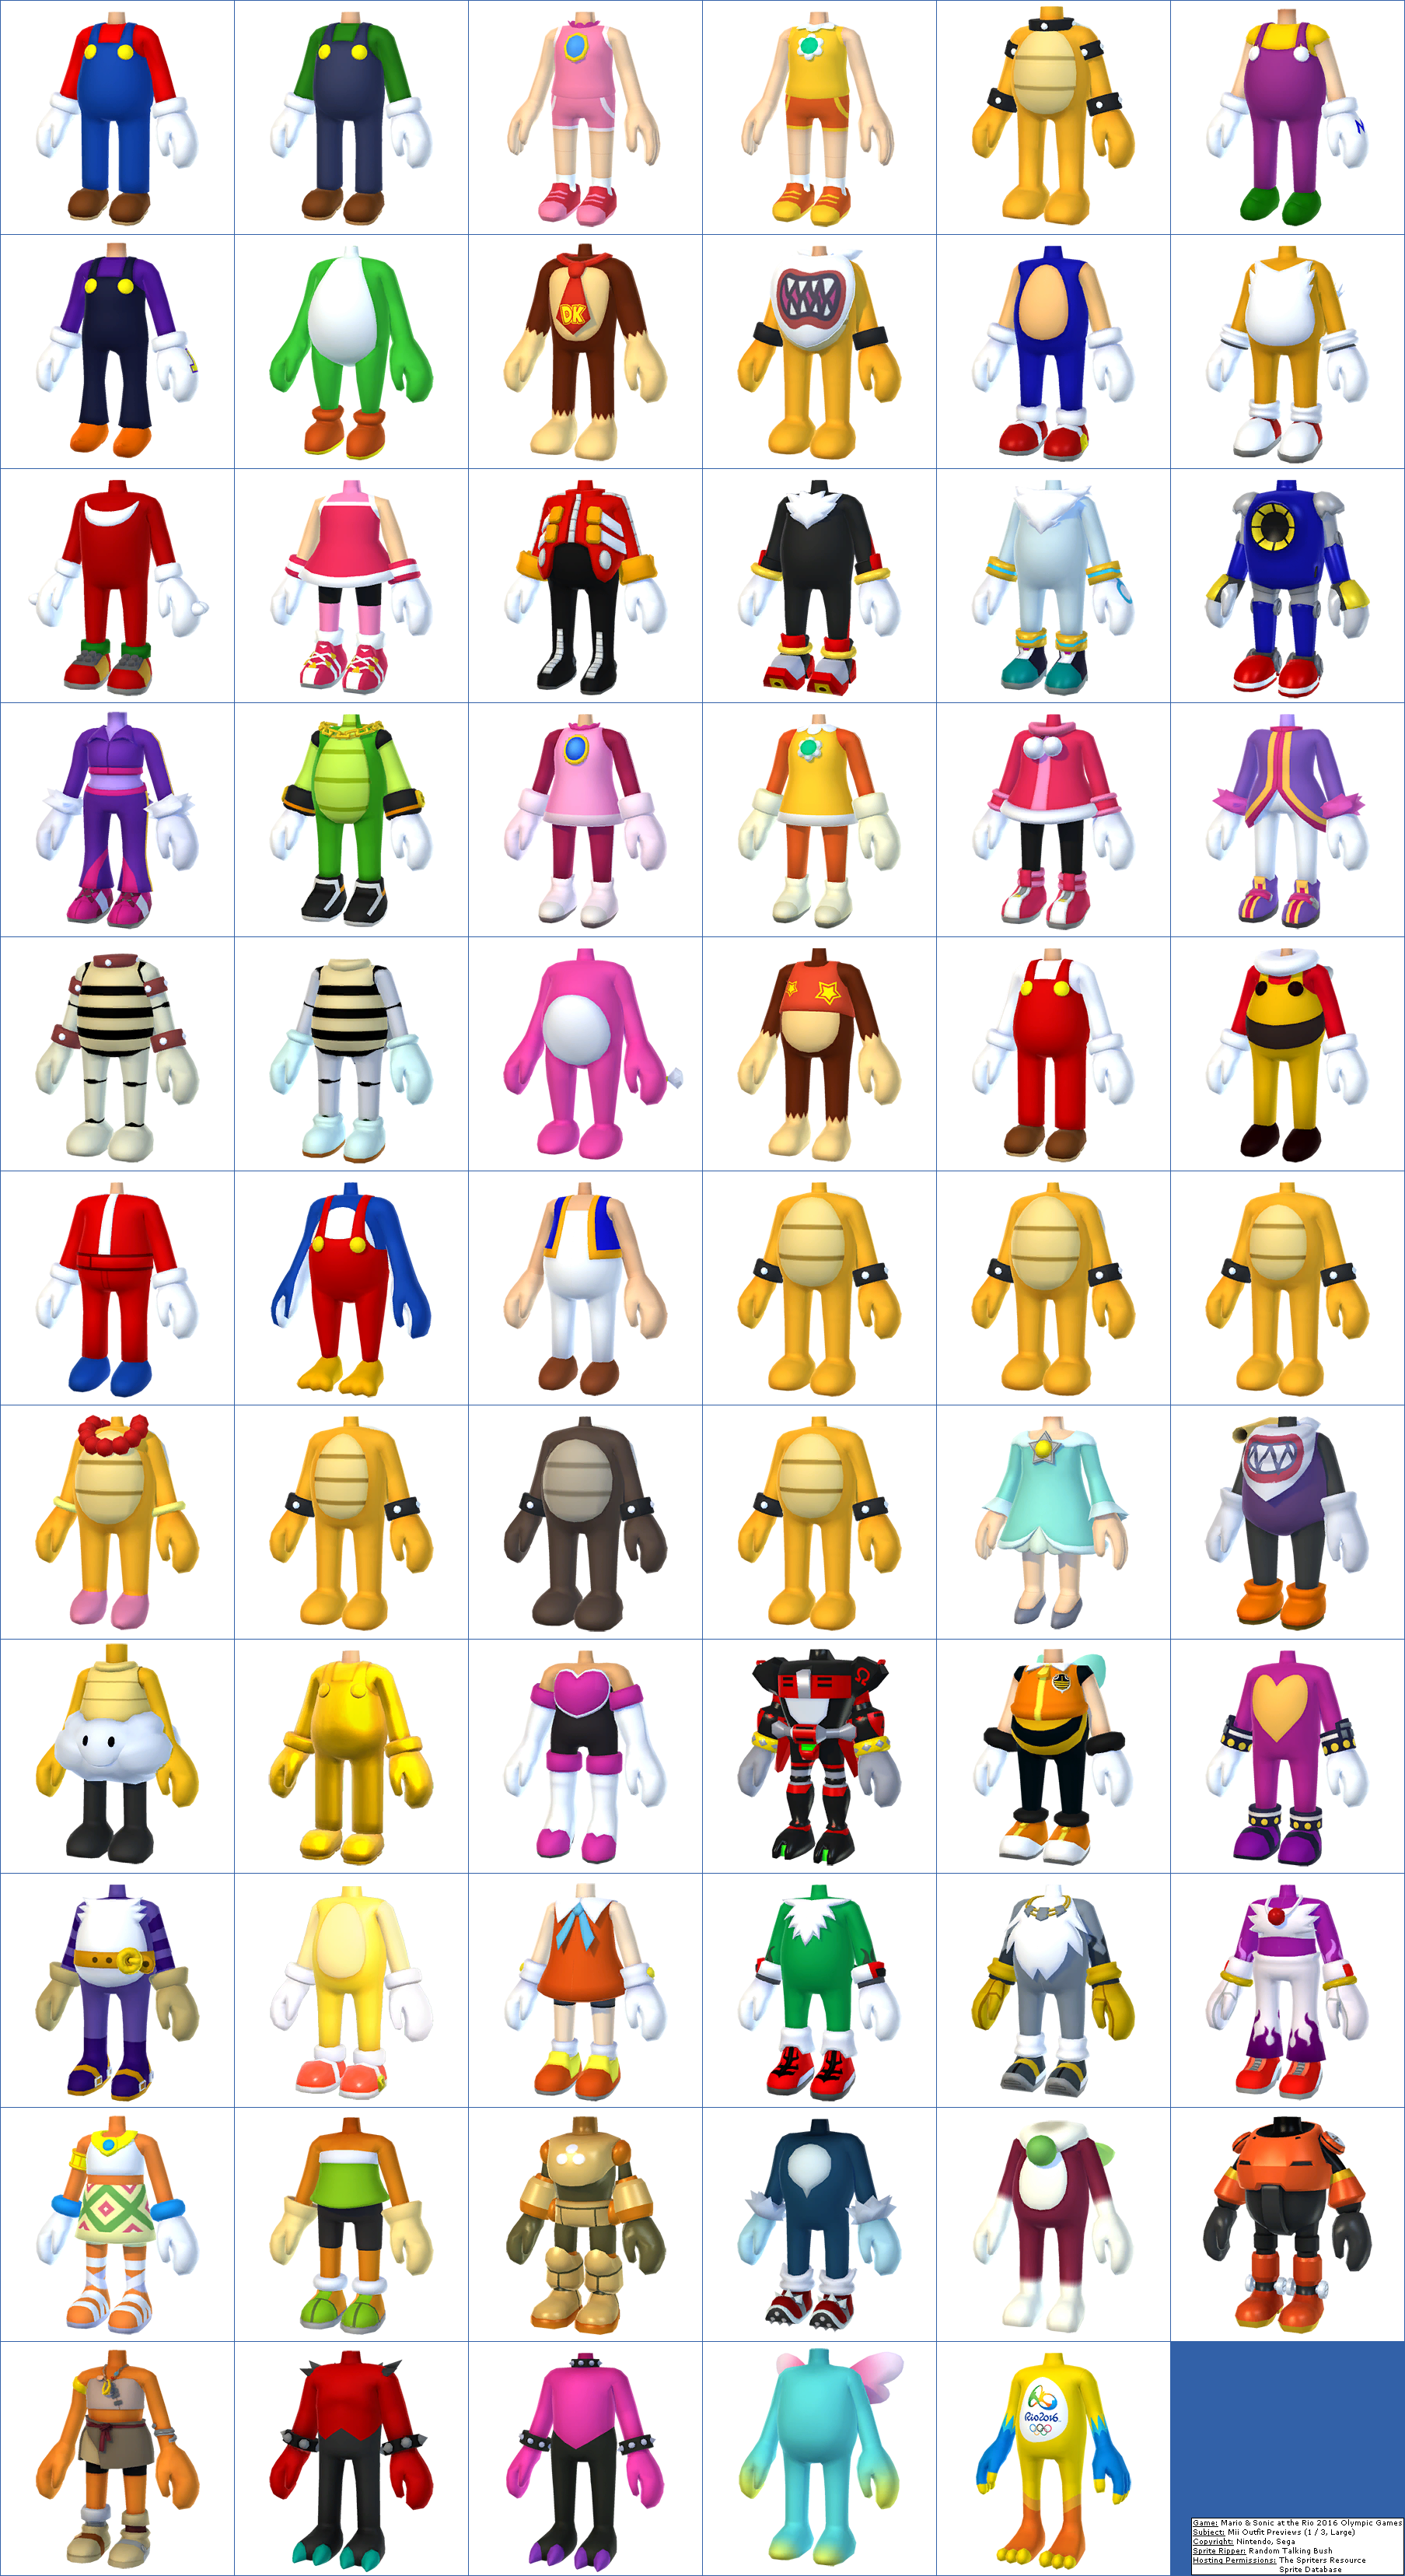 Mii Outfit Previews (1 / 3, Large)